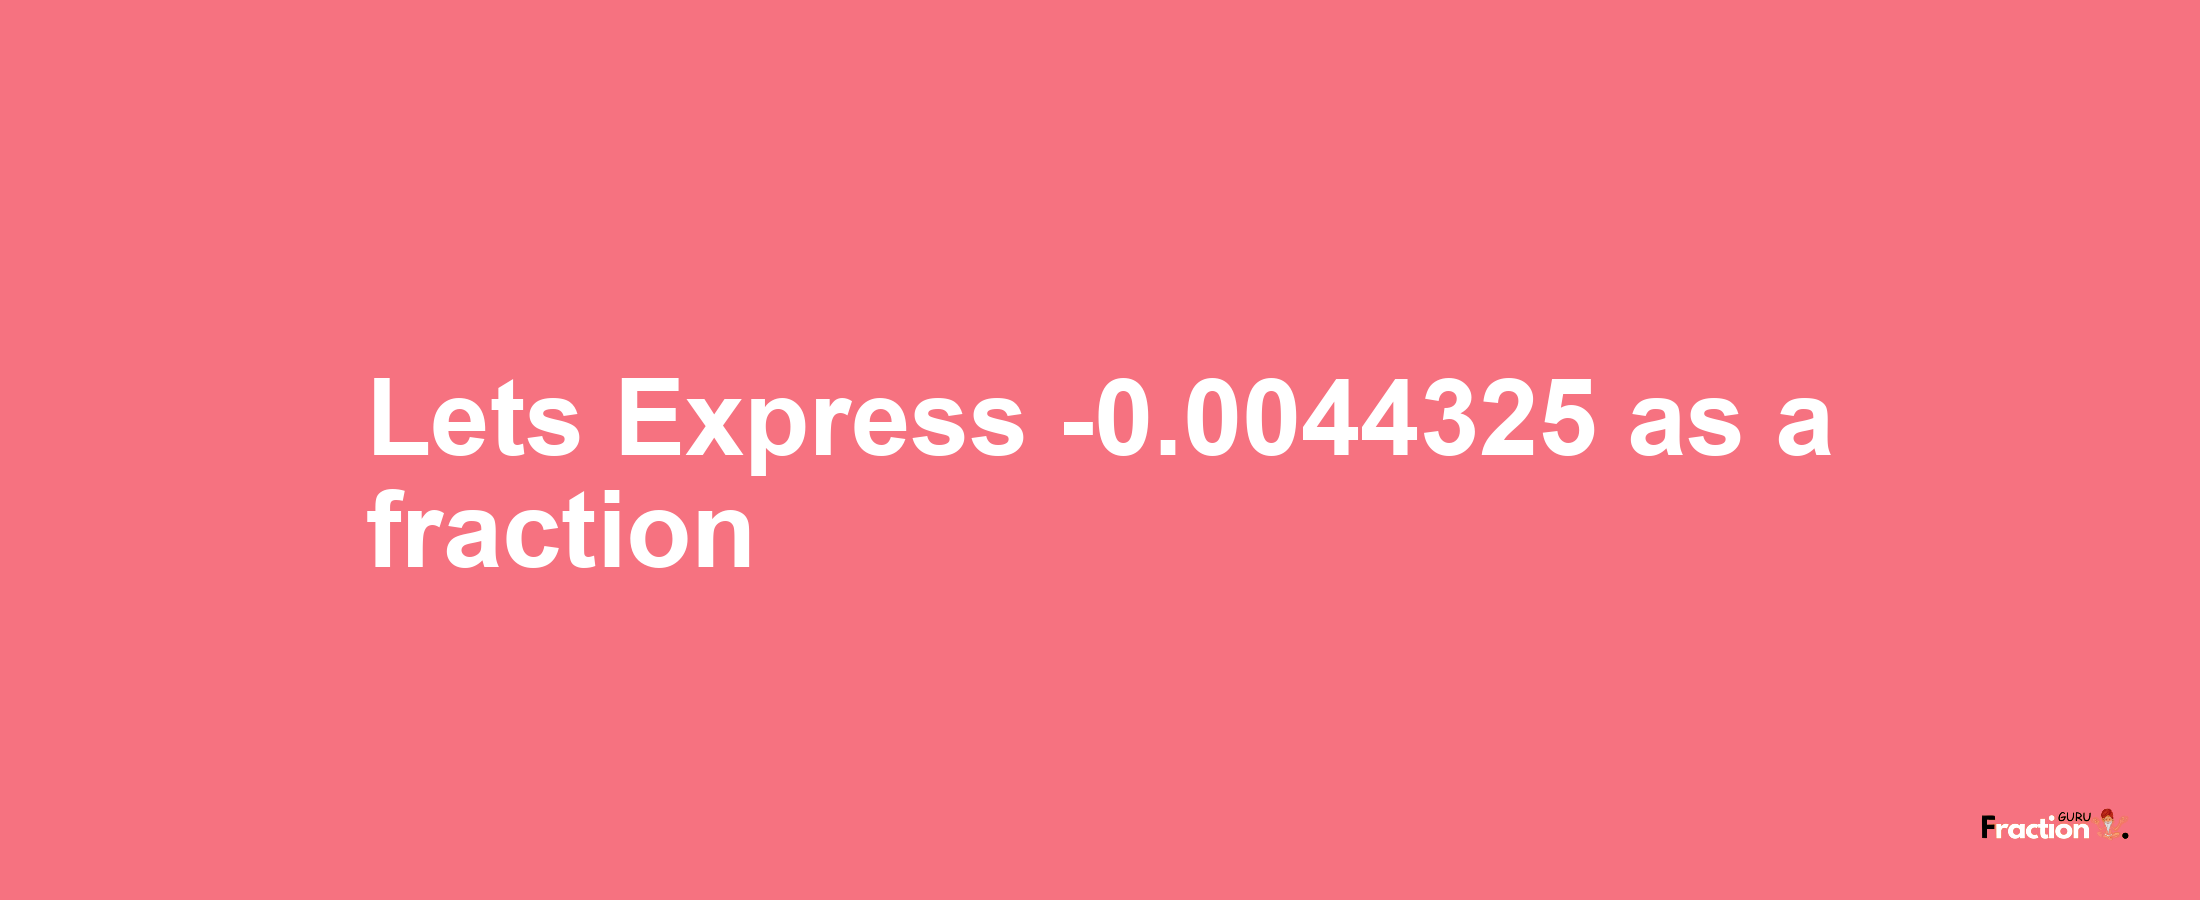 Lets Express -0.0044325 as afraction